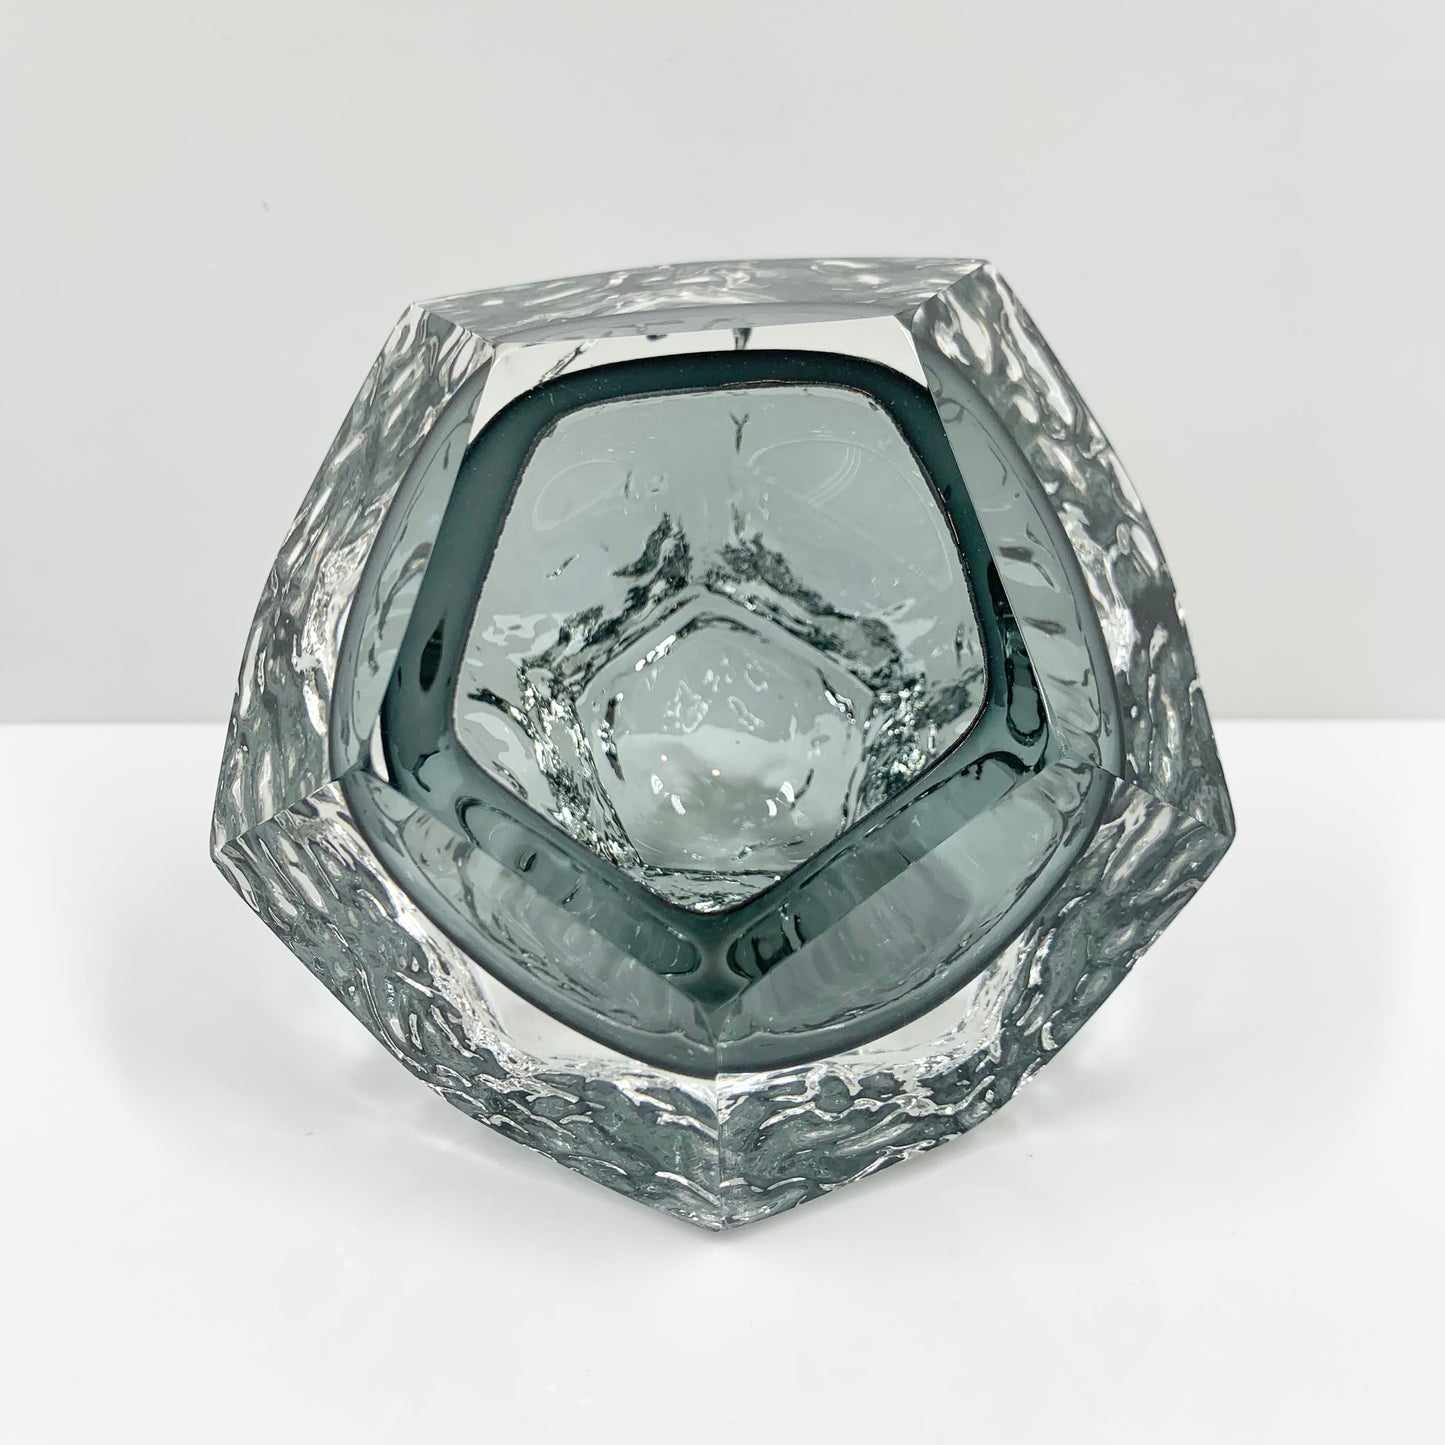 Extremely rare MCM textured grey Murano Sommerso faceted glass ashtray/bowl with textured base by Mandruzatto